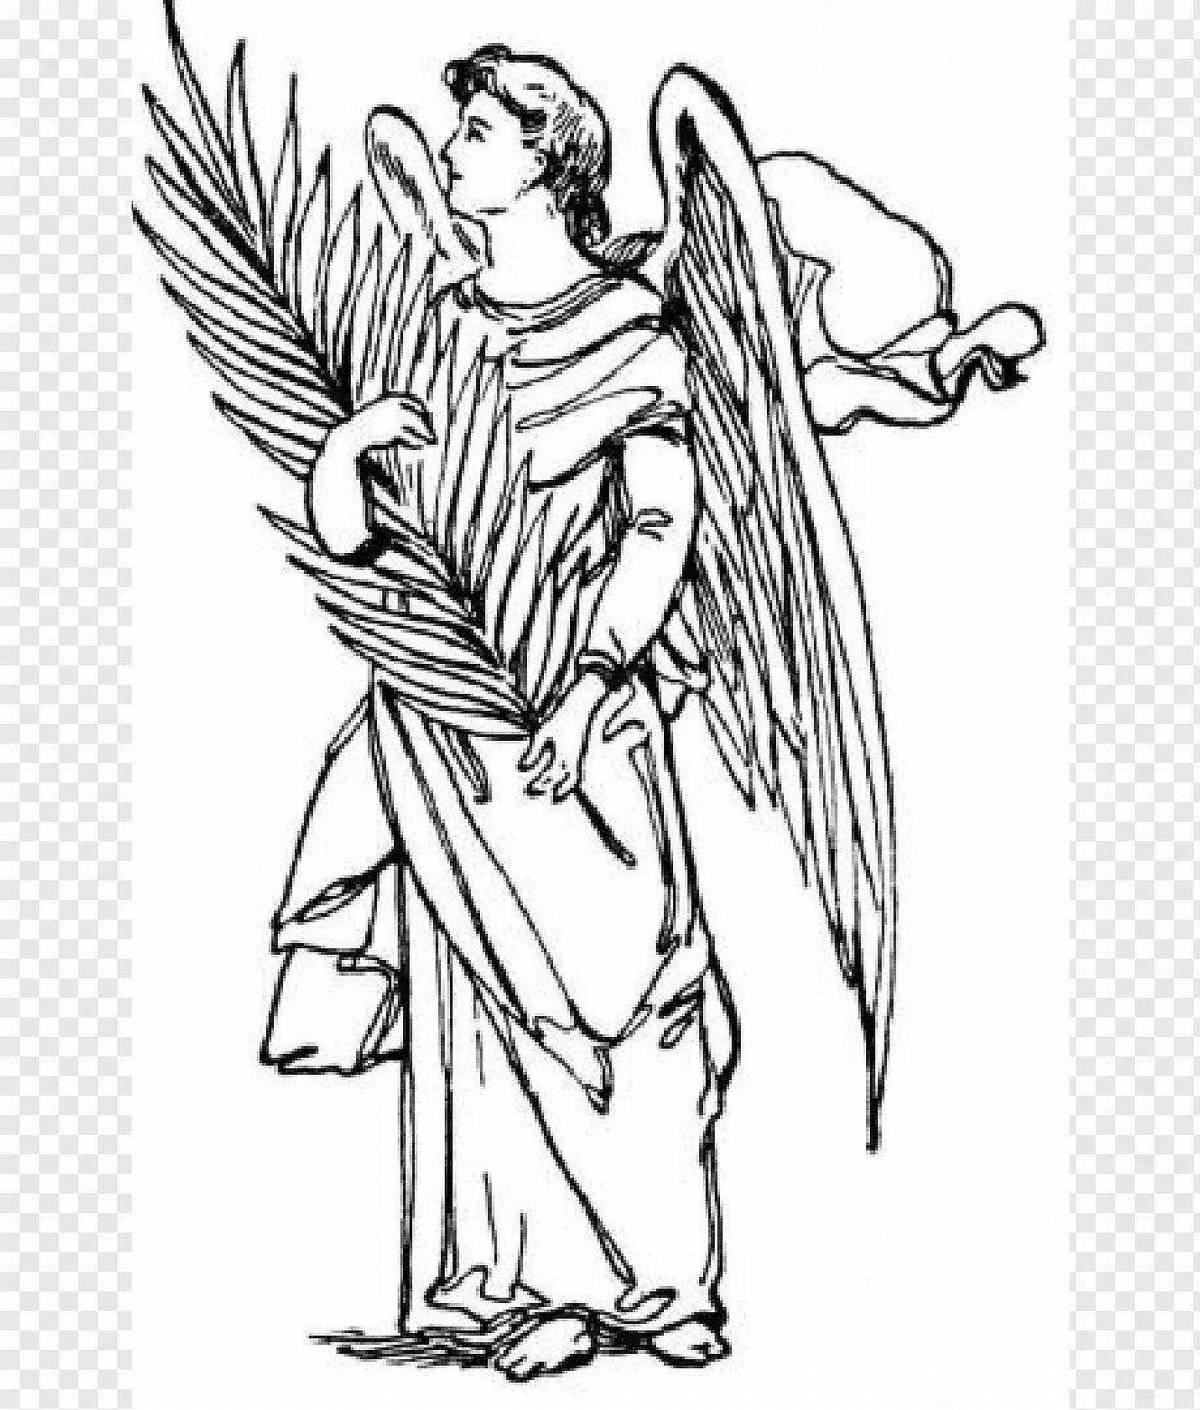 Exalted guardian angel coloring page